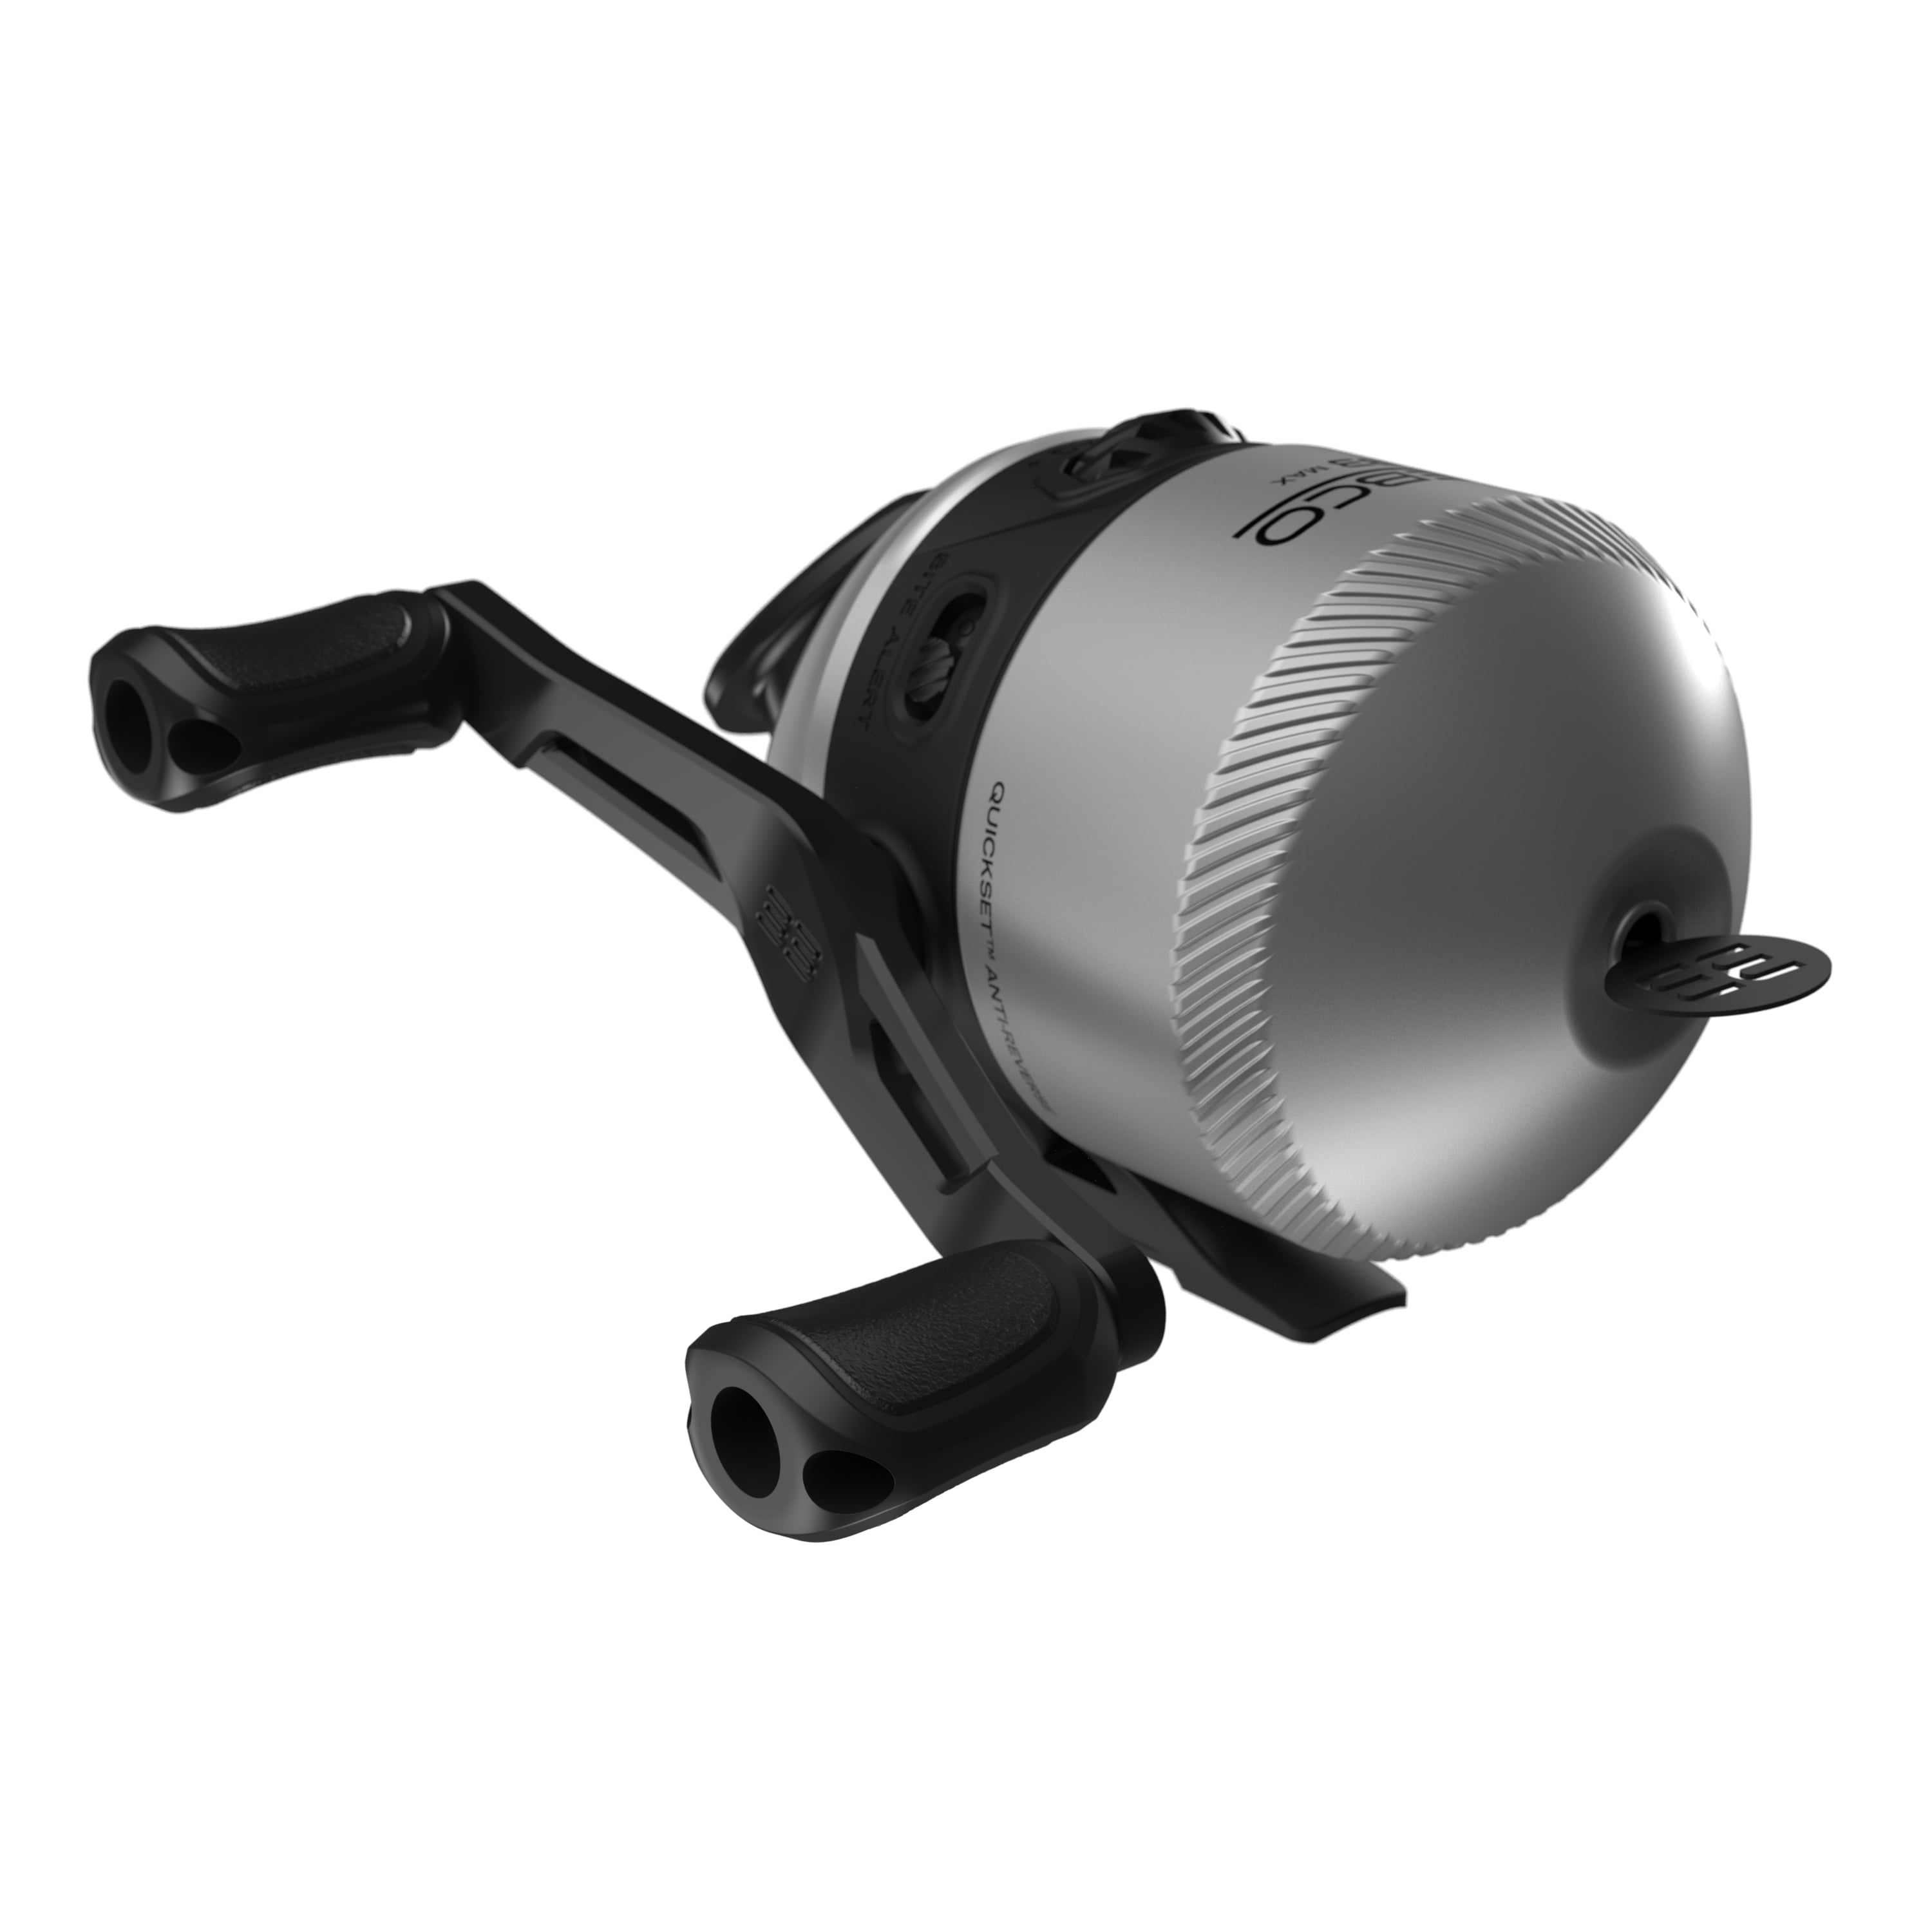 Daiwa Underspin XD Spincast Reel Trigger Us80xd-cp 4.3 1 Gear Ratio 80xd for sale online 